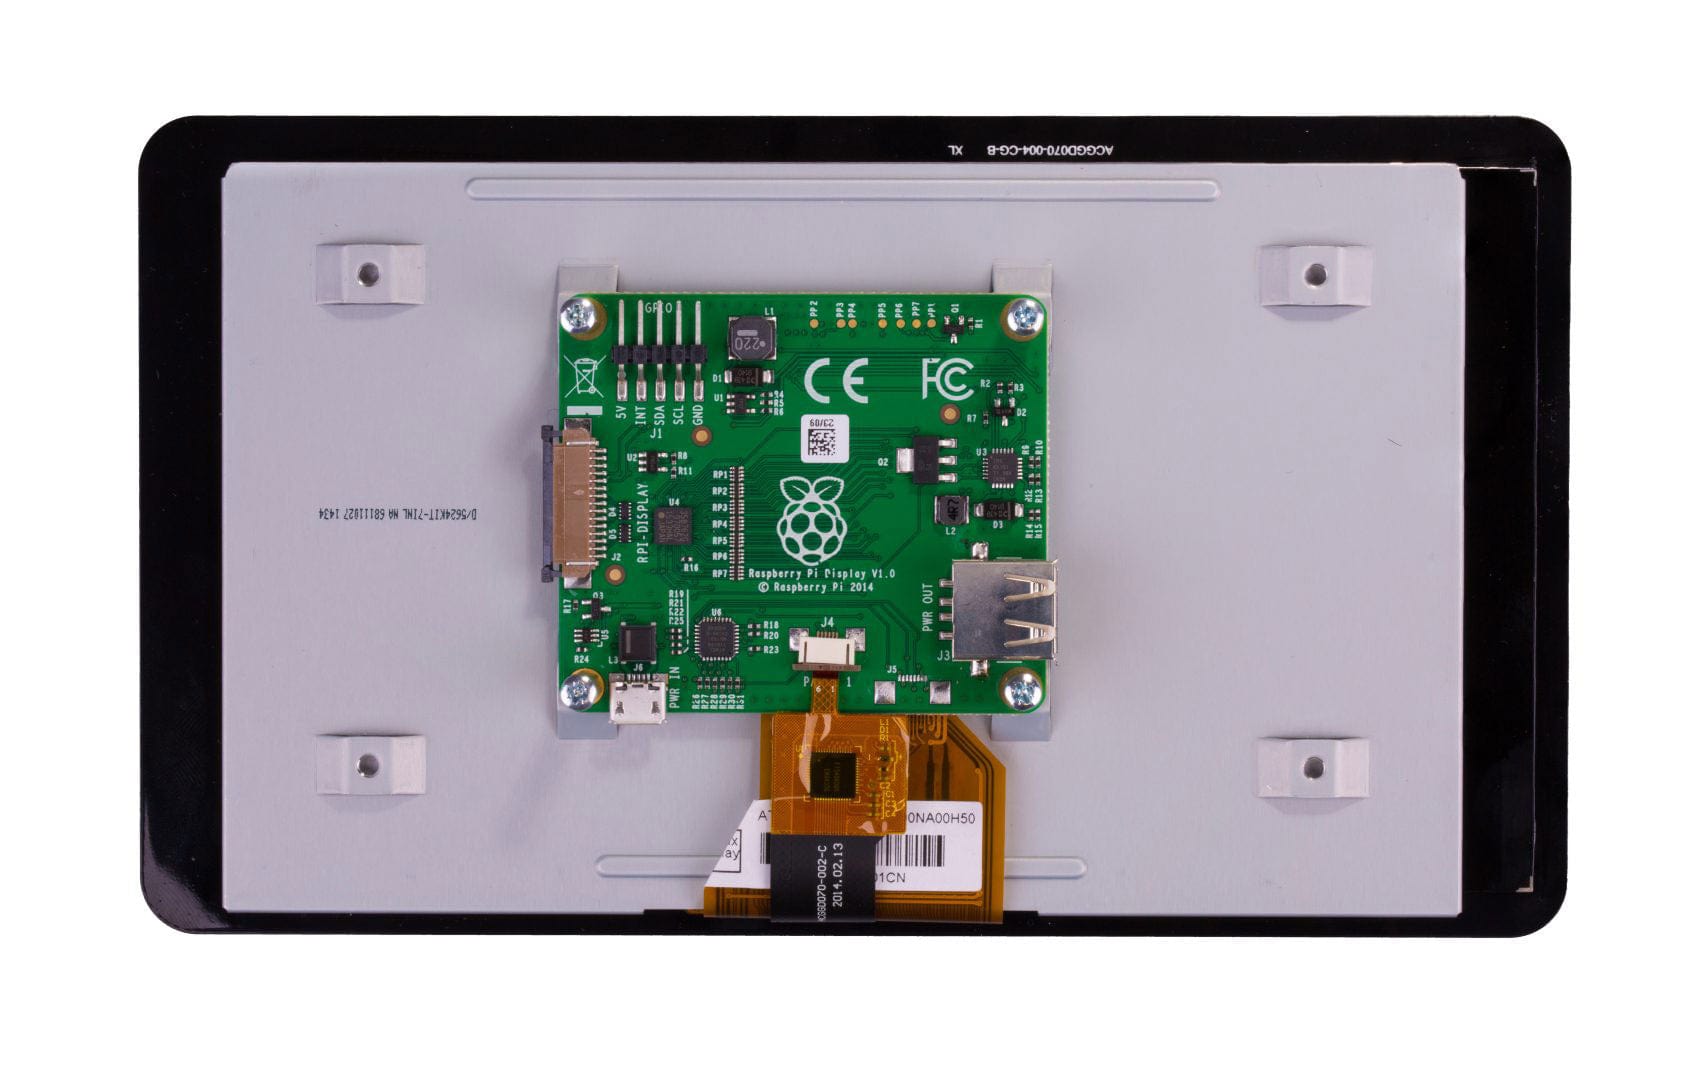 Official Raspberry Pi 7" Touchscreen Display - The Pi Hut